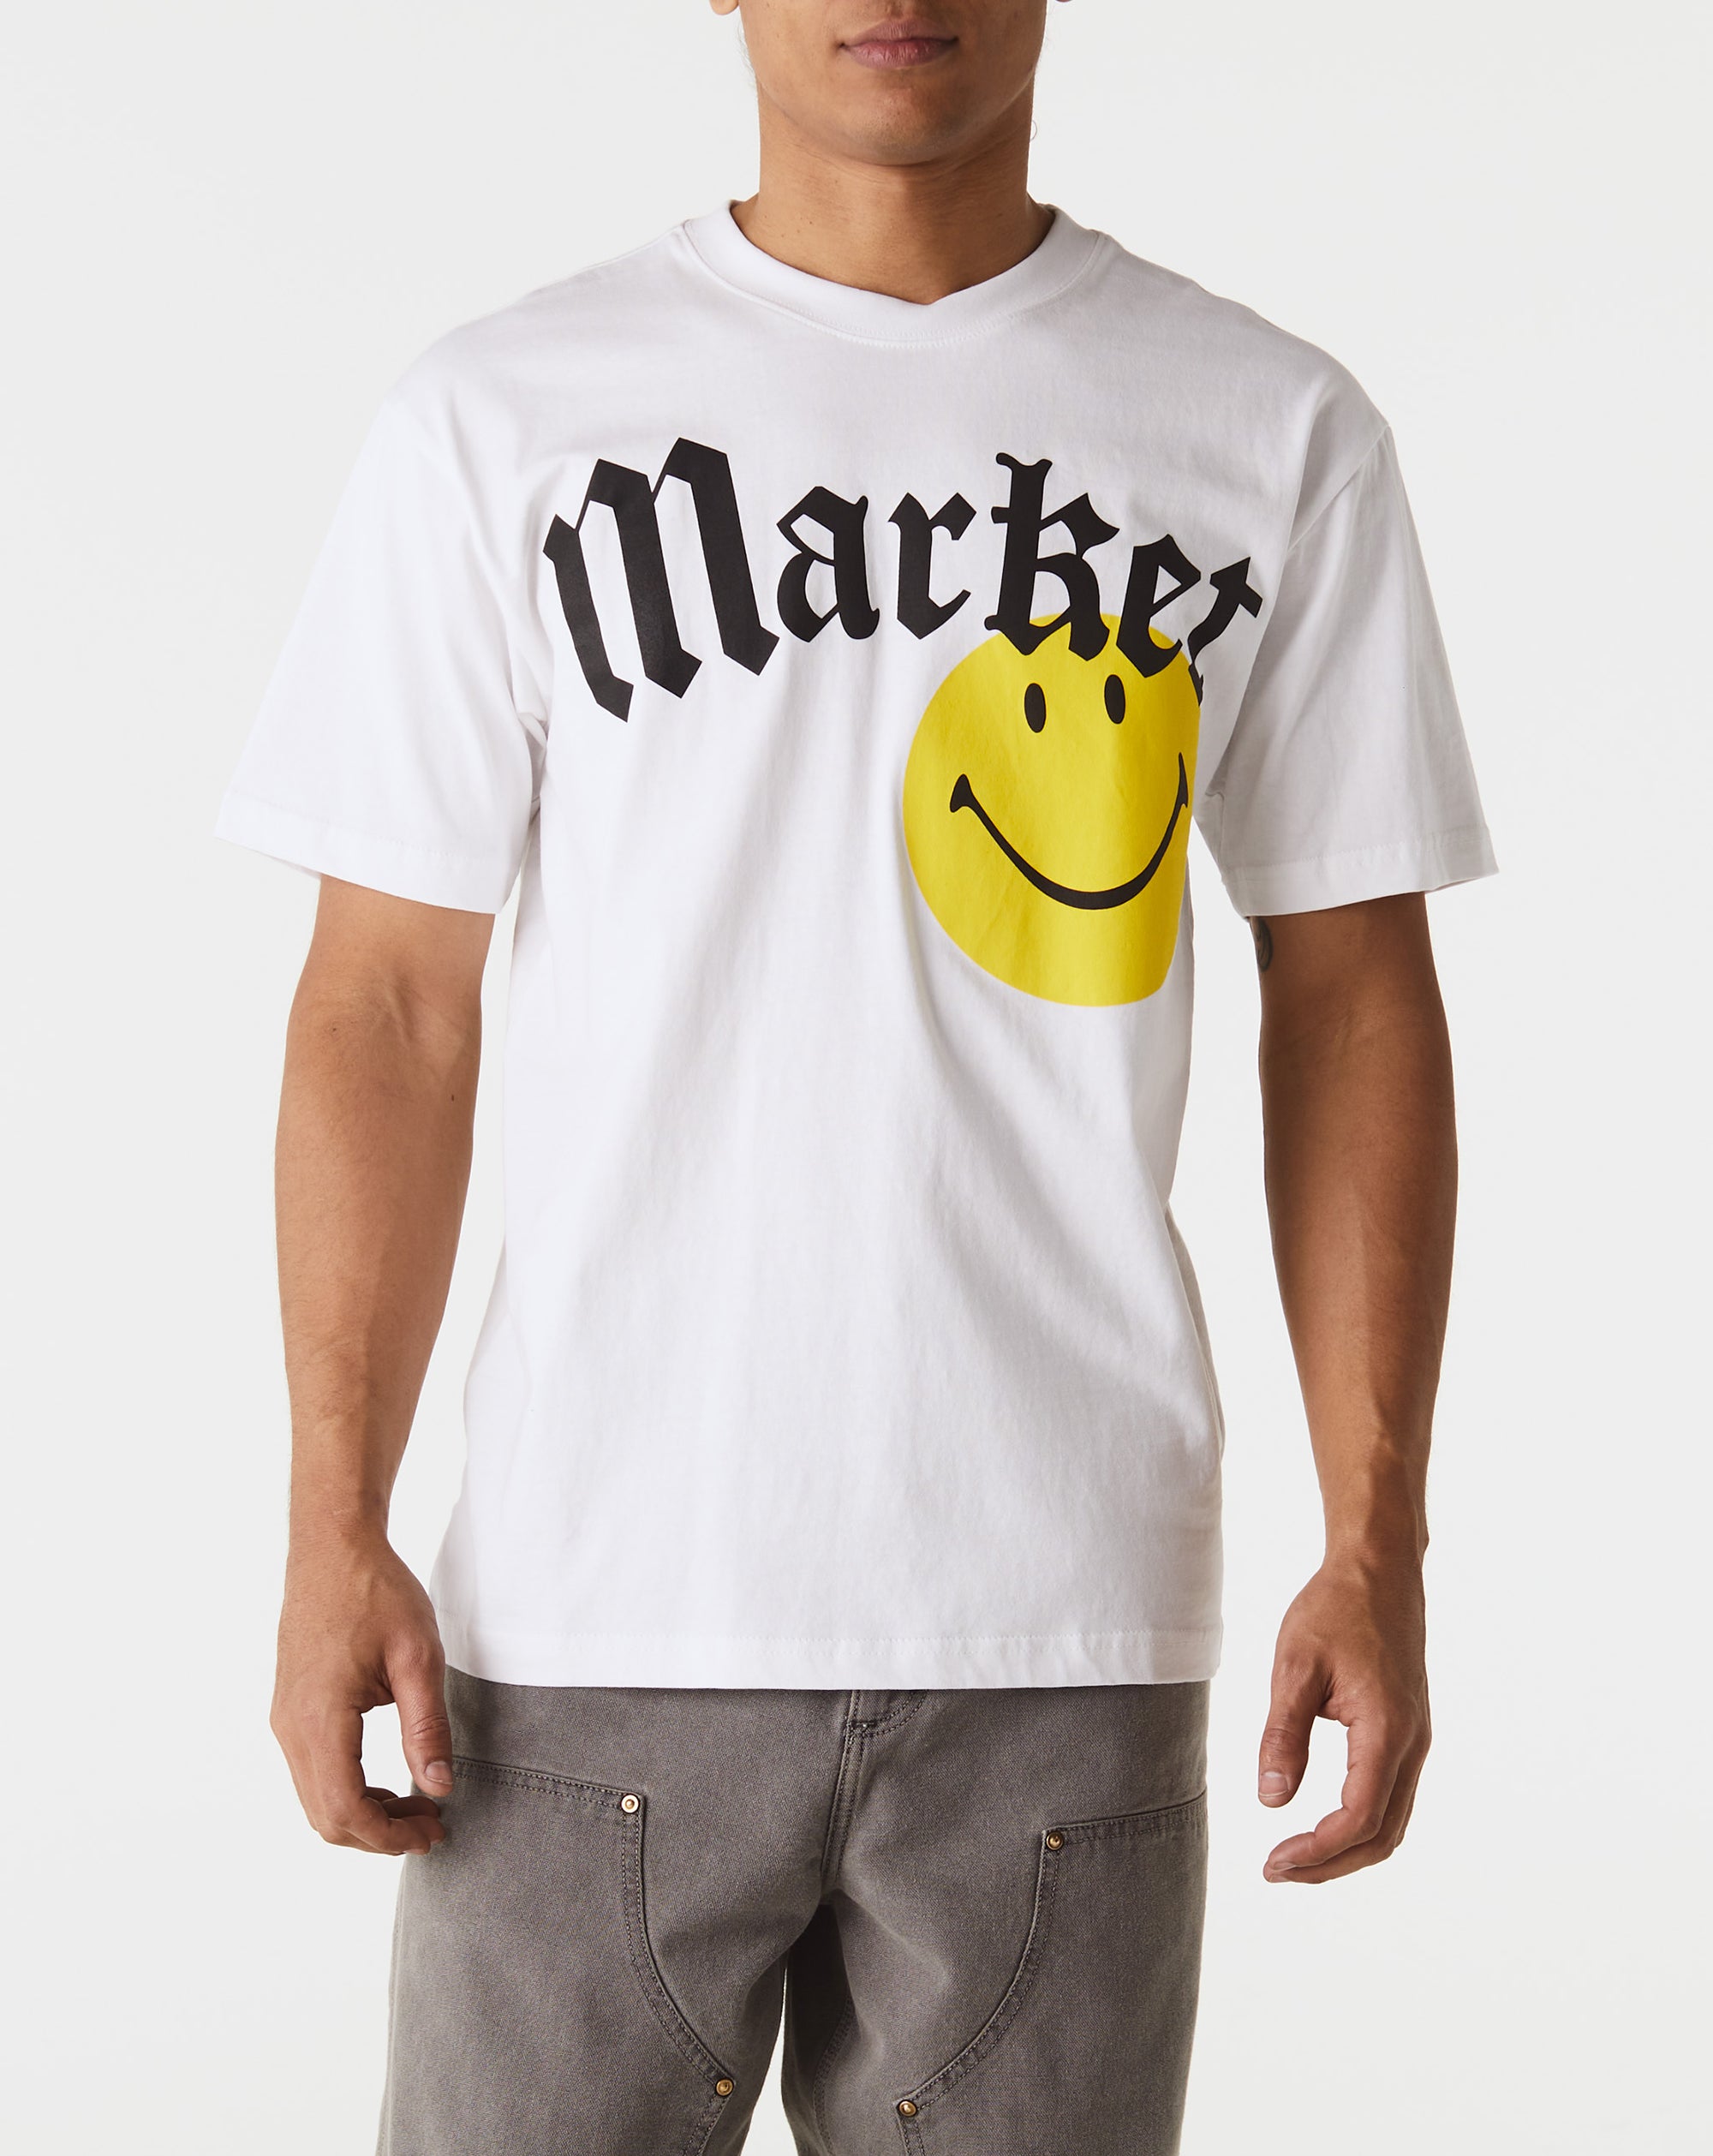 Market Smiley Gothic T-Shirt - Rule of Next Apparel